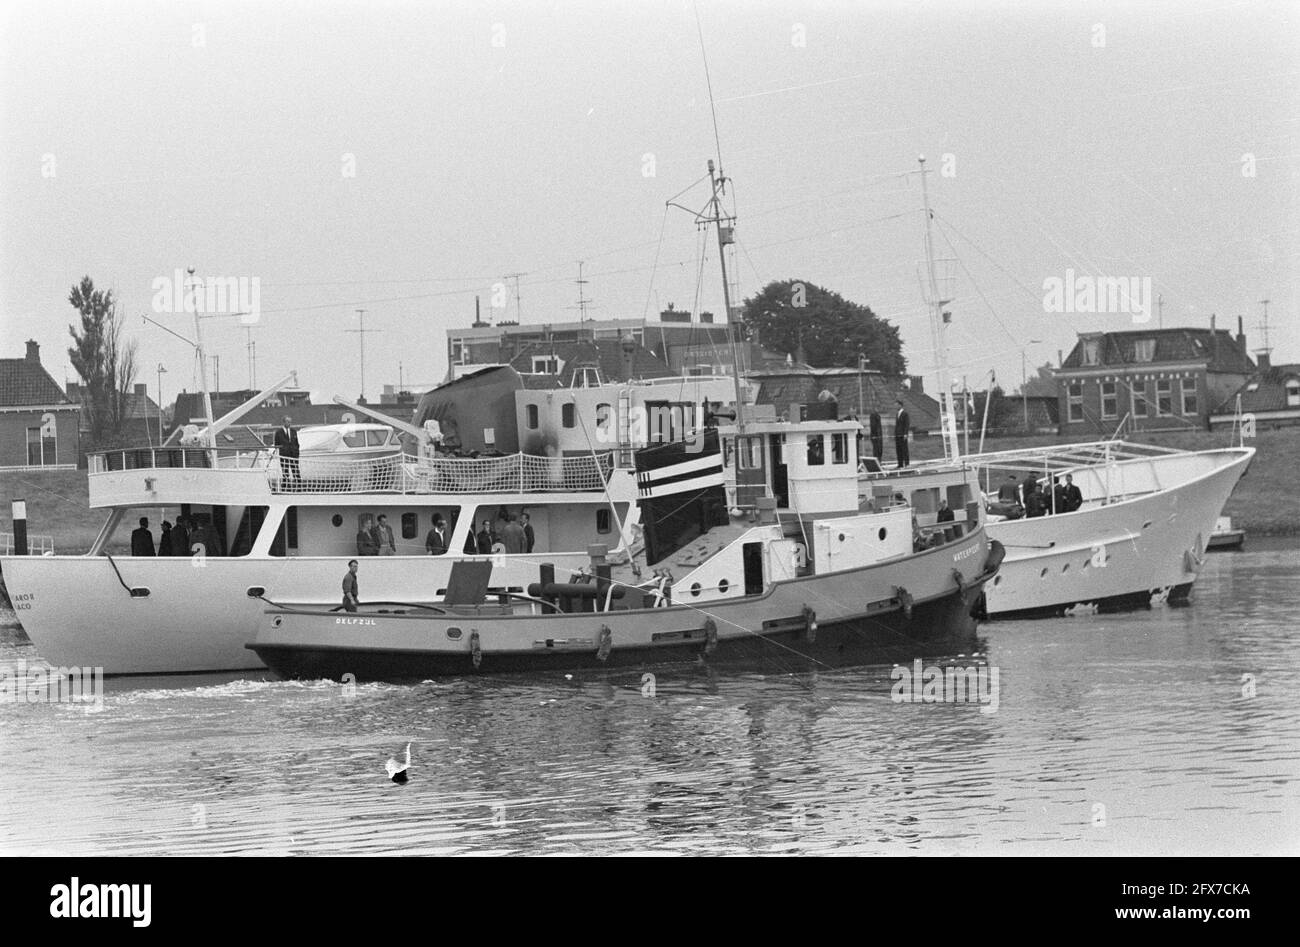 Prince Rainier's yacht on fire due to explosion in engine room. The yacht enters the port of Delfzijl with tugboat assistance, August 14, 1963, JACHT, havens, The Netherlands, 20th century press agency photo, news to remember, documentary, historic photography 1945-1990, visual stories, human history of the Twentieth Century, capturing moments in time Stock Photo